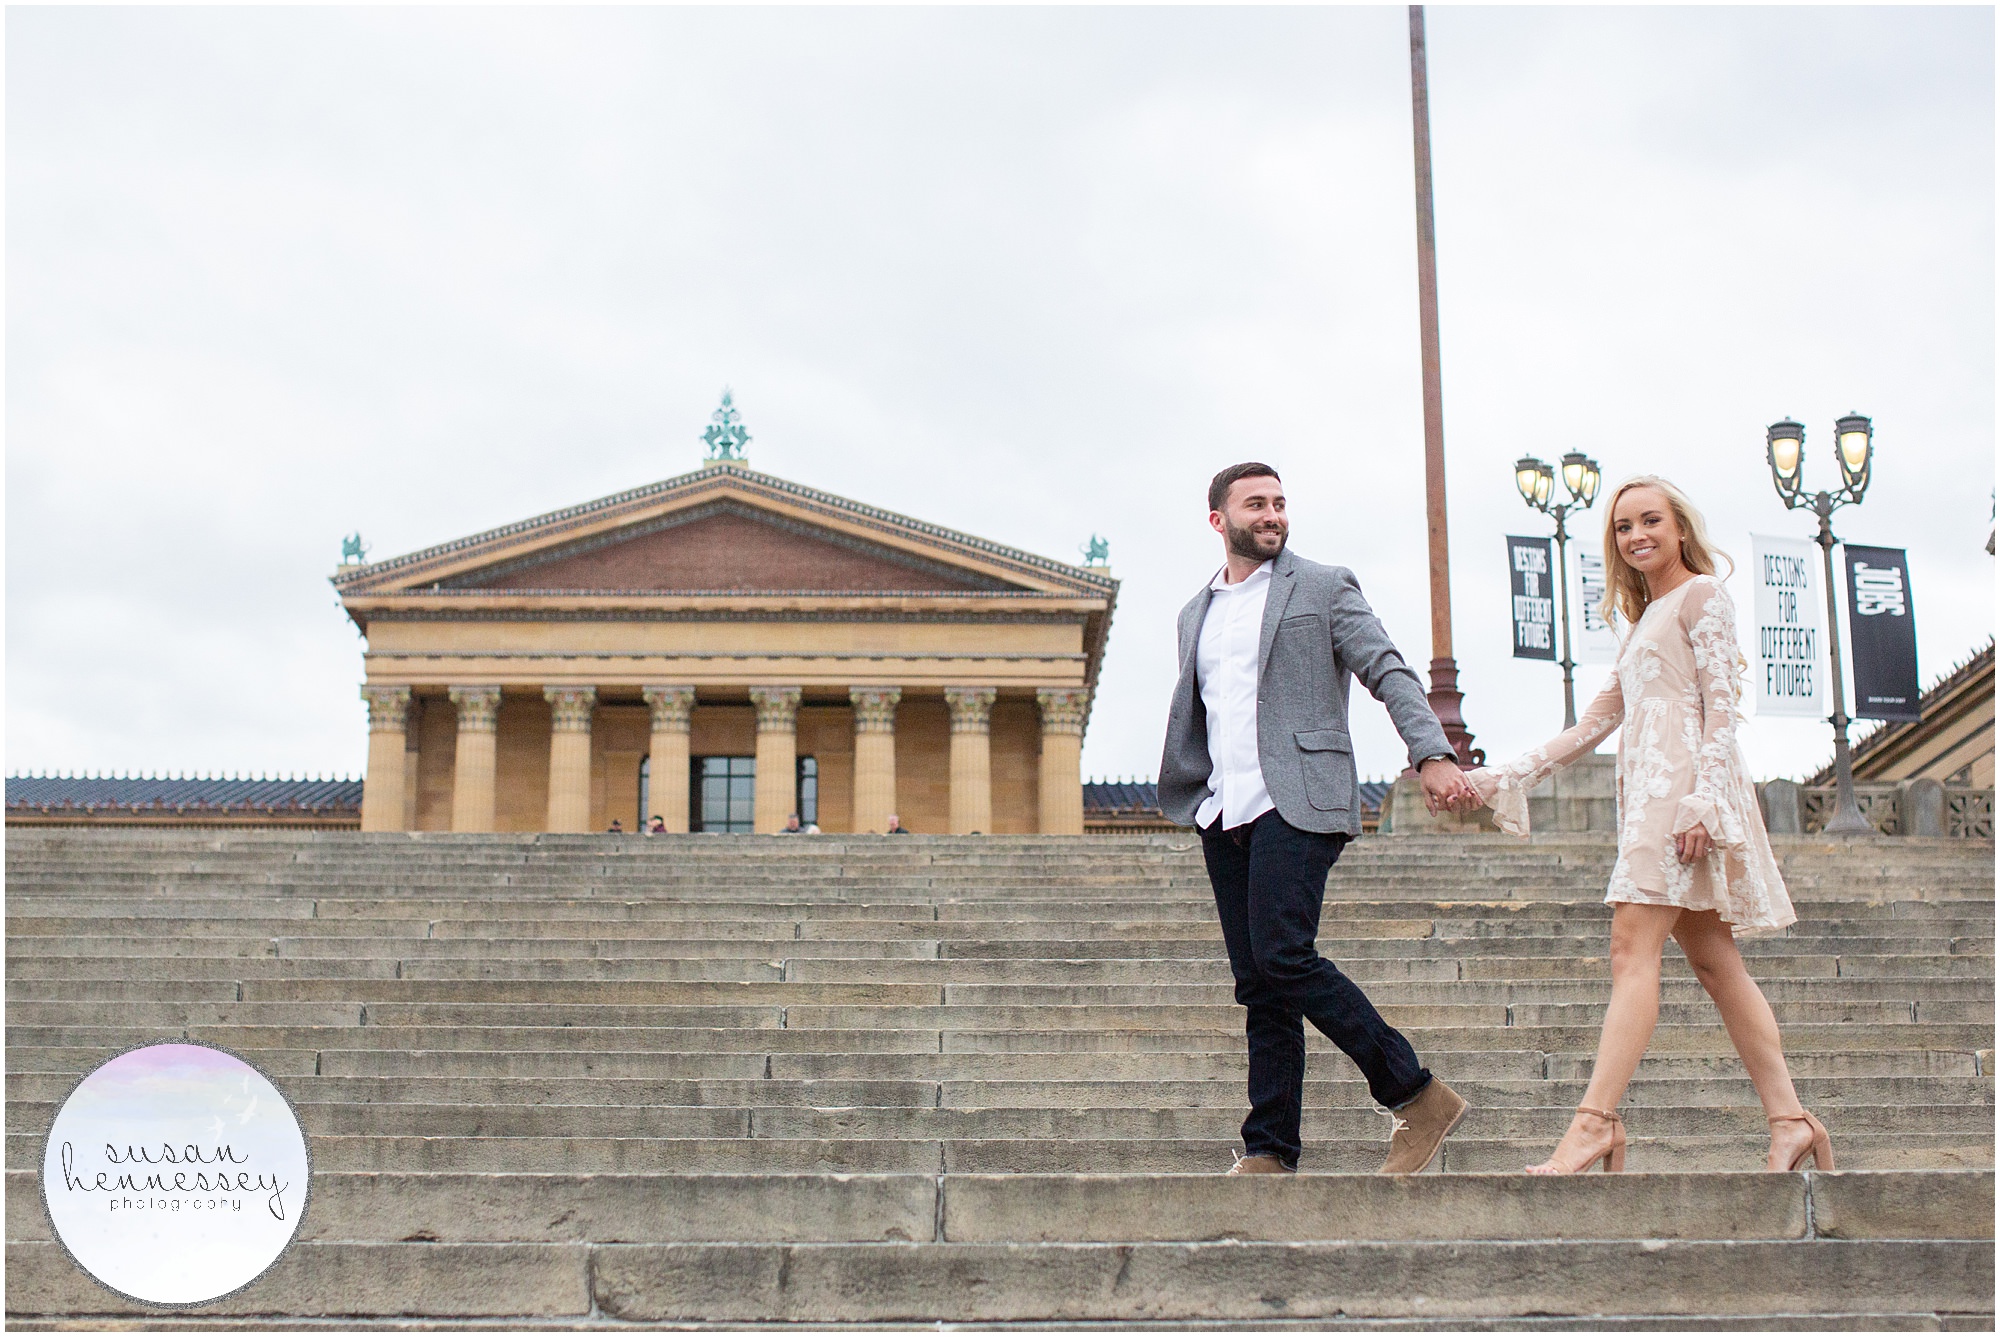 An engaged couple on the Art Museum stairs in Philadelphia